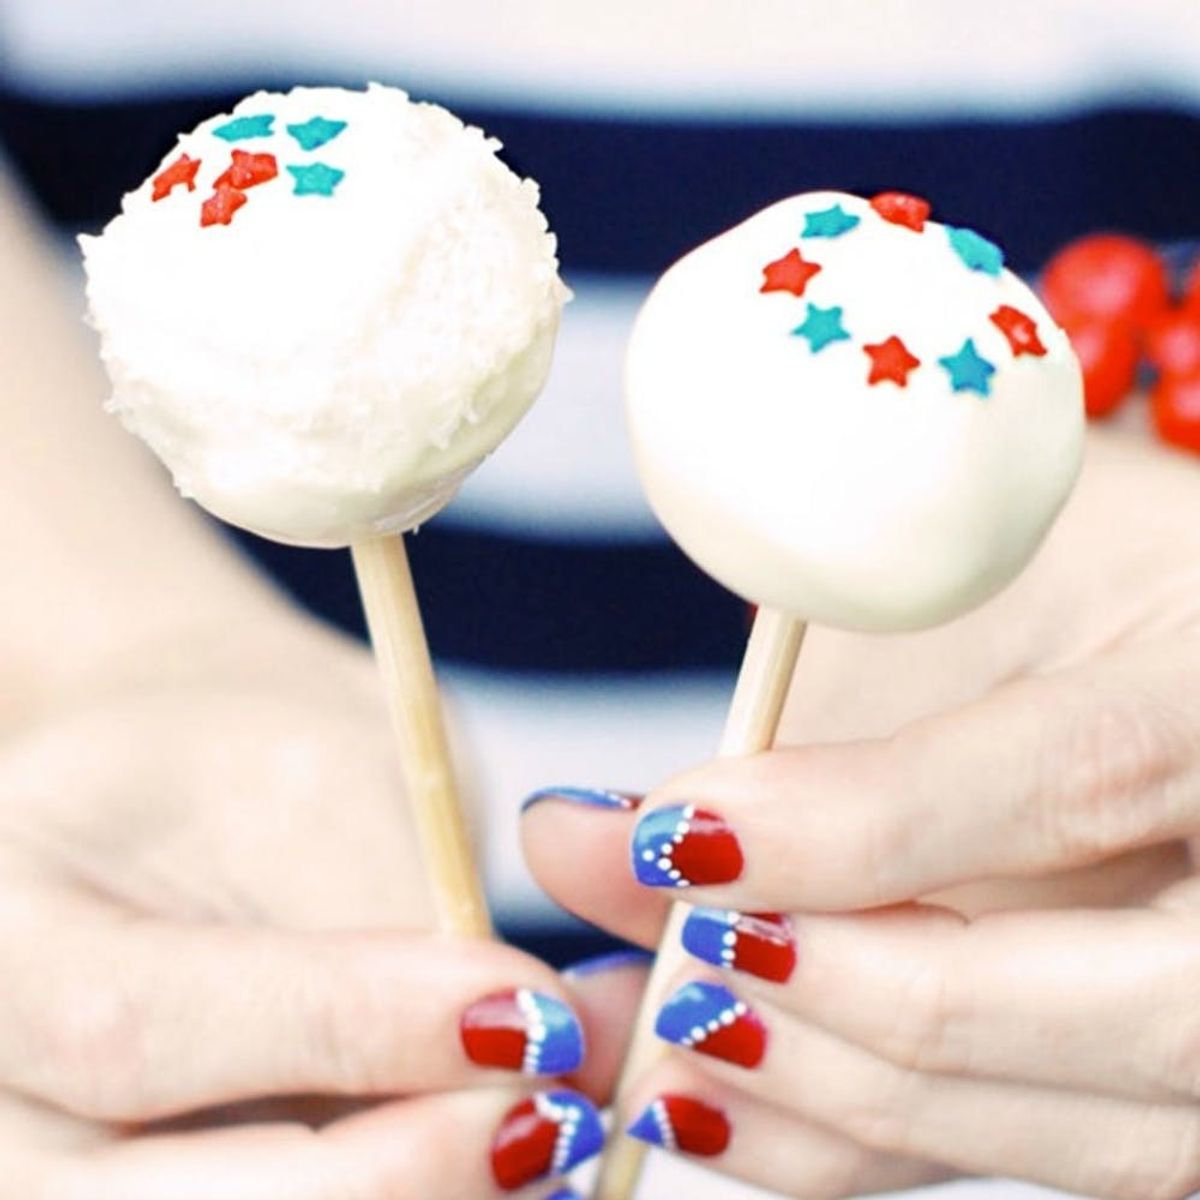 15 Spangled 4th of July Cupcake and Cake Recipes